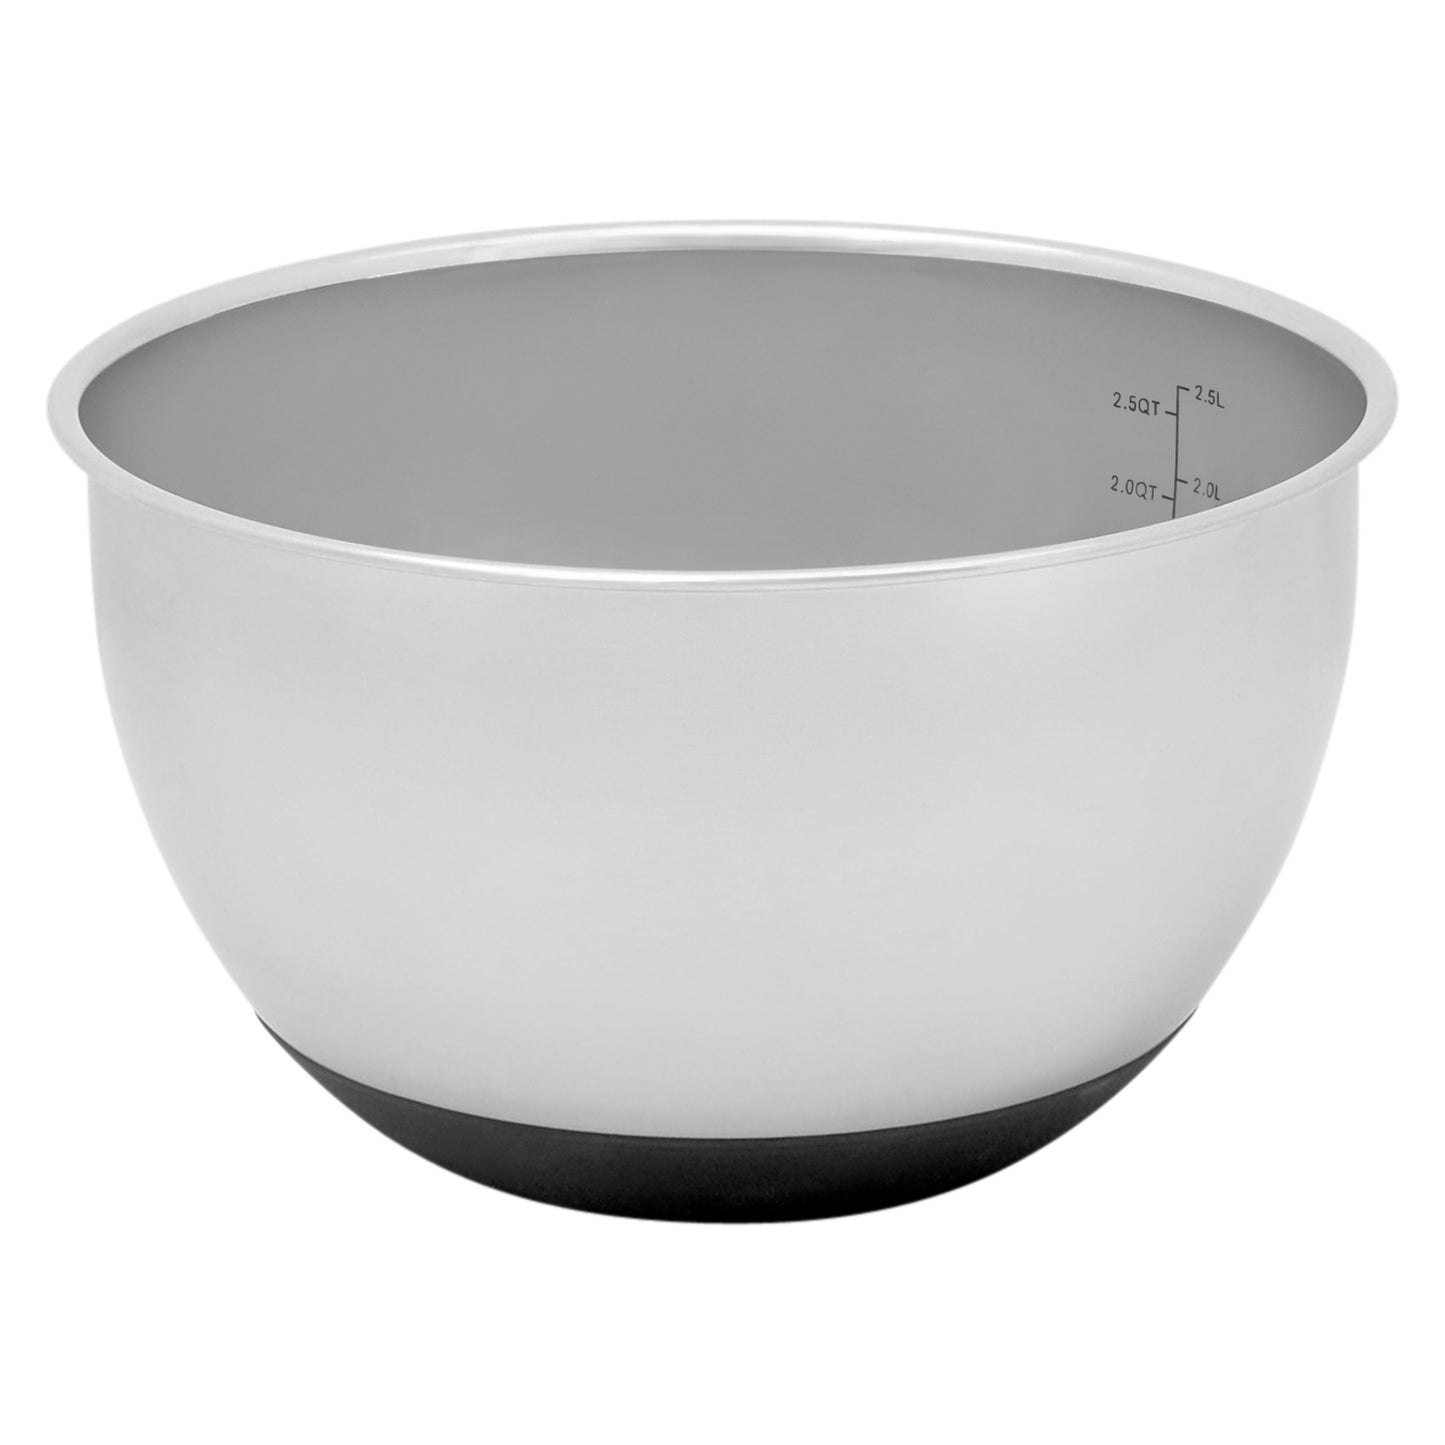 Westinghouse Mixing Bowl Set 2 Piece Stainless Steel